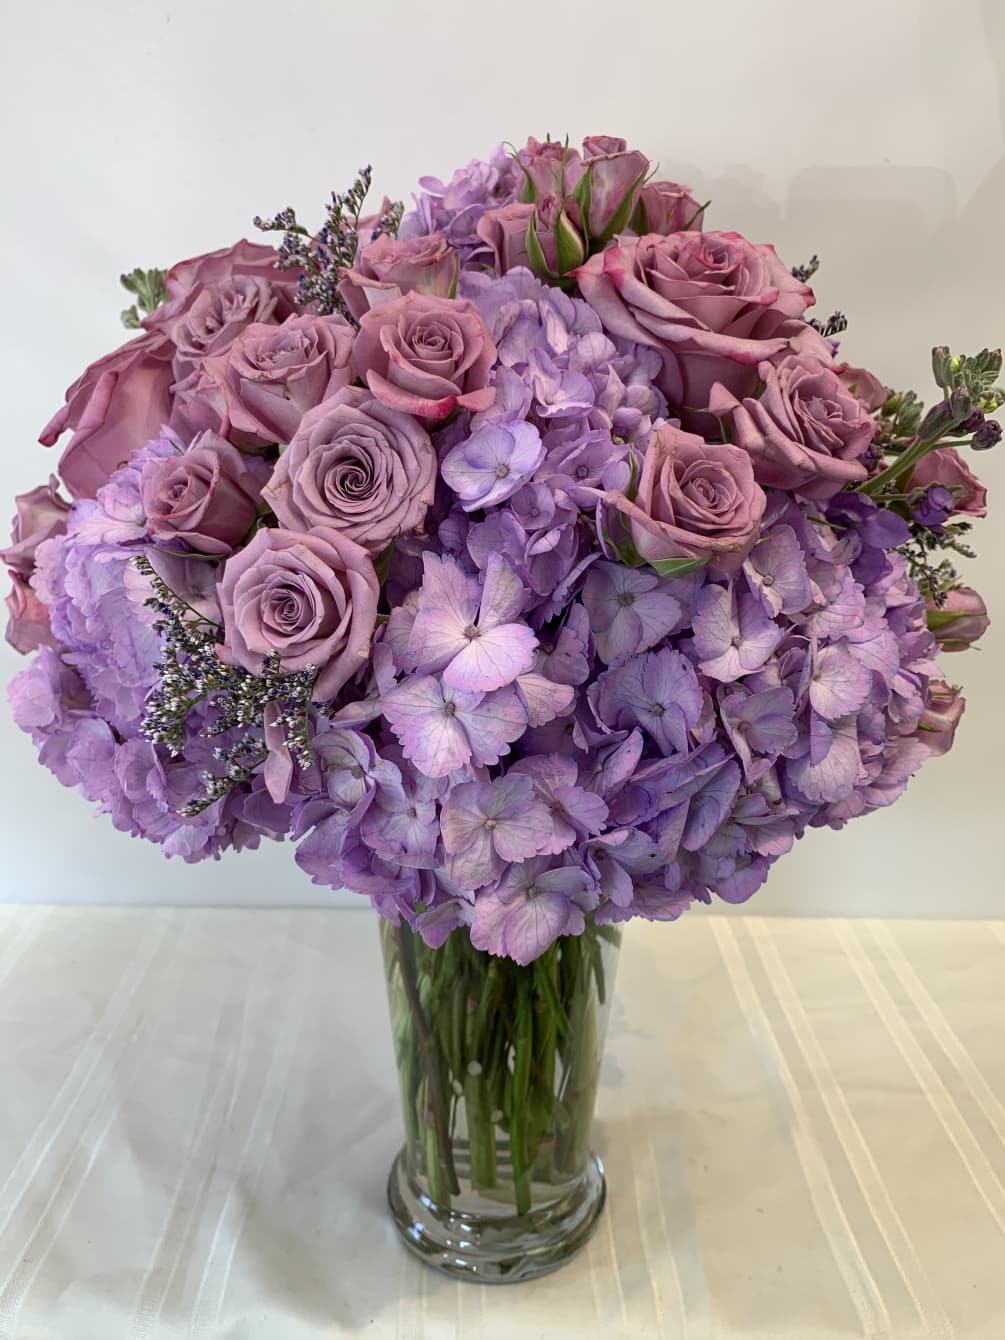 Lavender Hydrangea, Roses, Spray Roses, Stocks, Caspia arranged nicely in clear glass